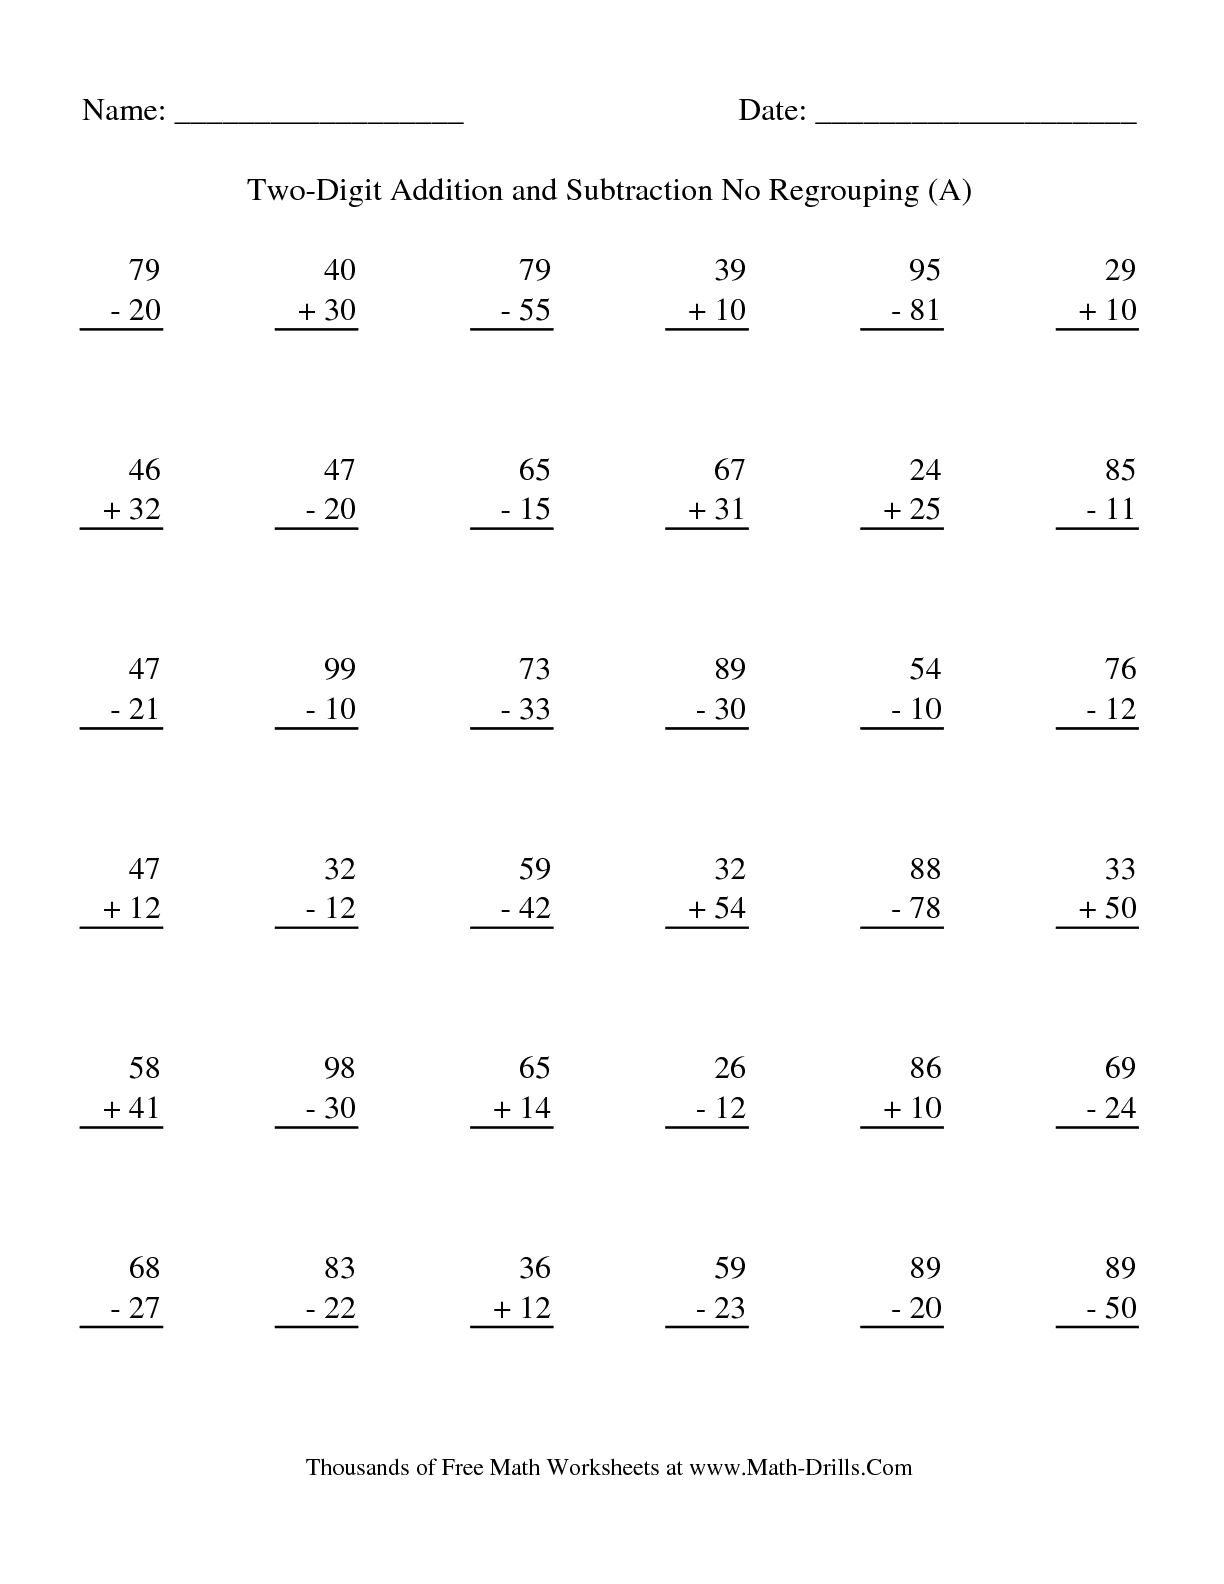 Two-Digit Addition and Subtraction Worksheets Image